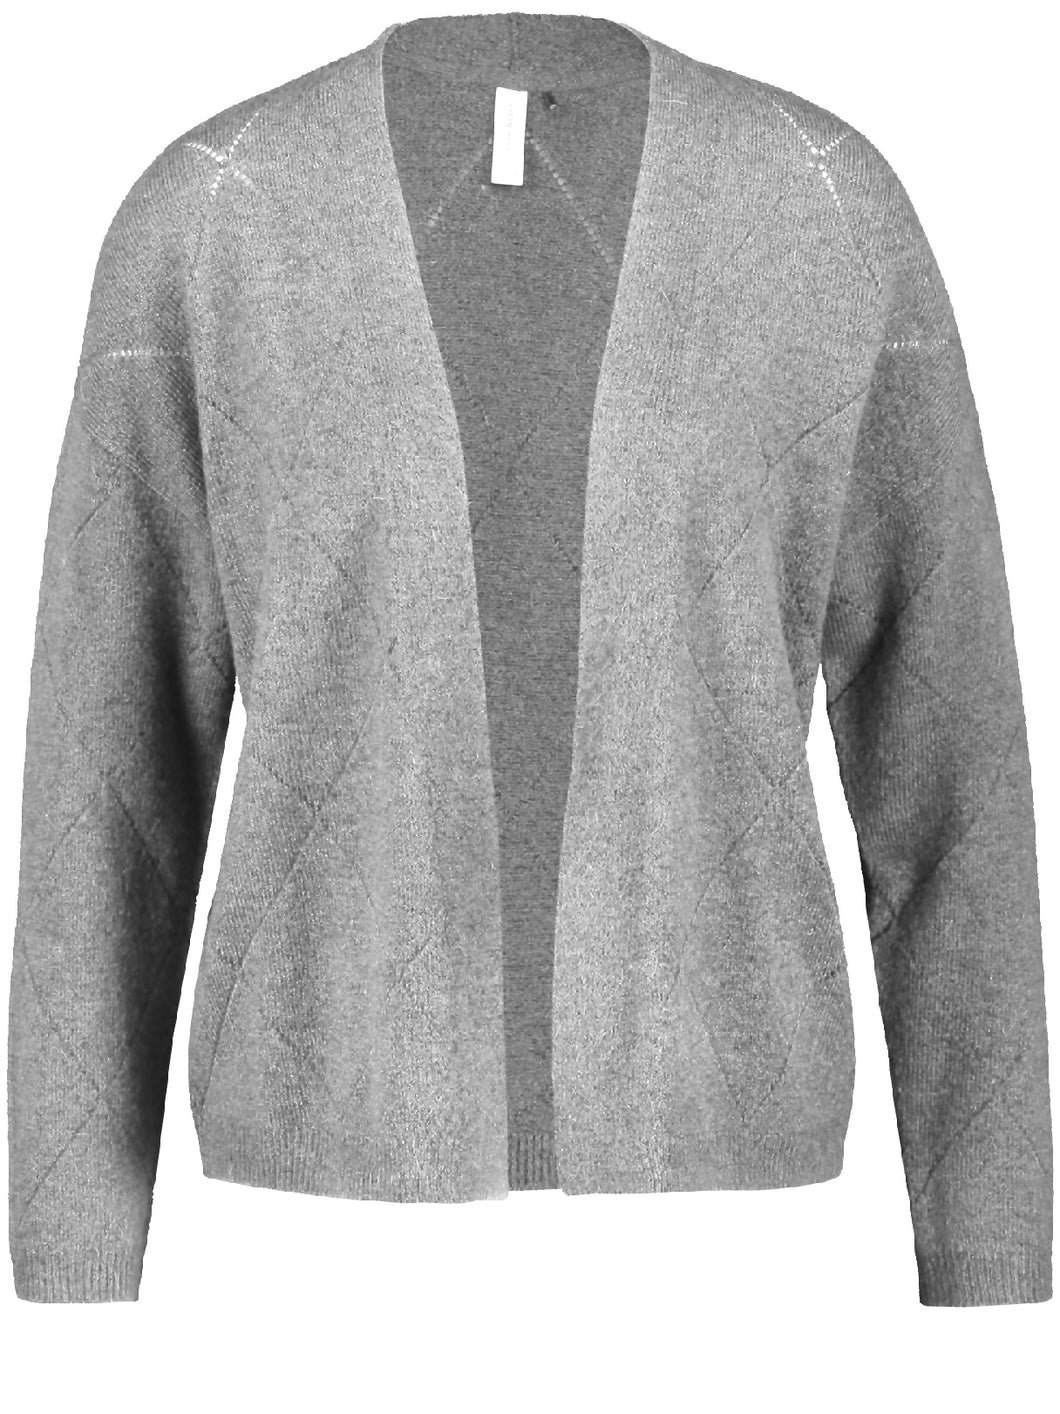 Cardigan with Textured Details